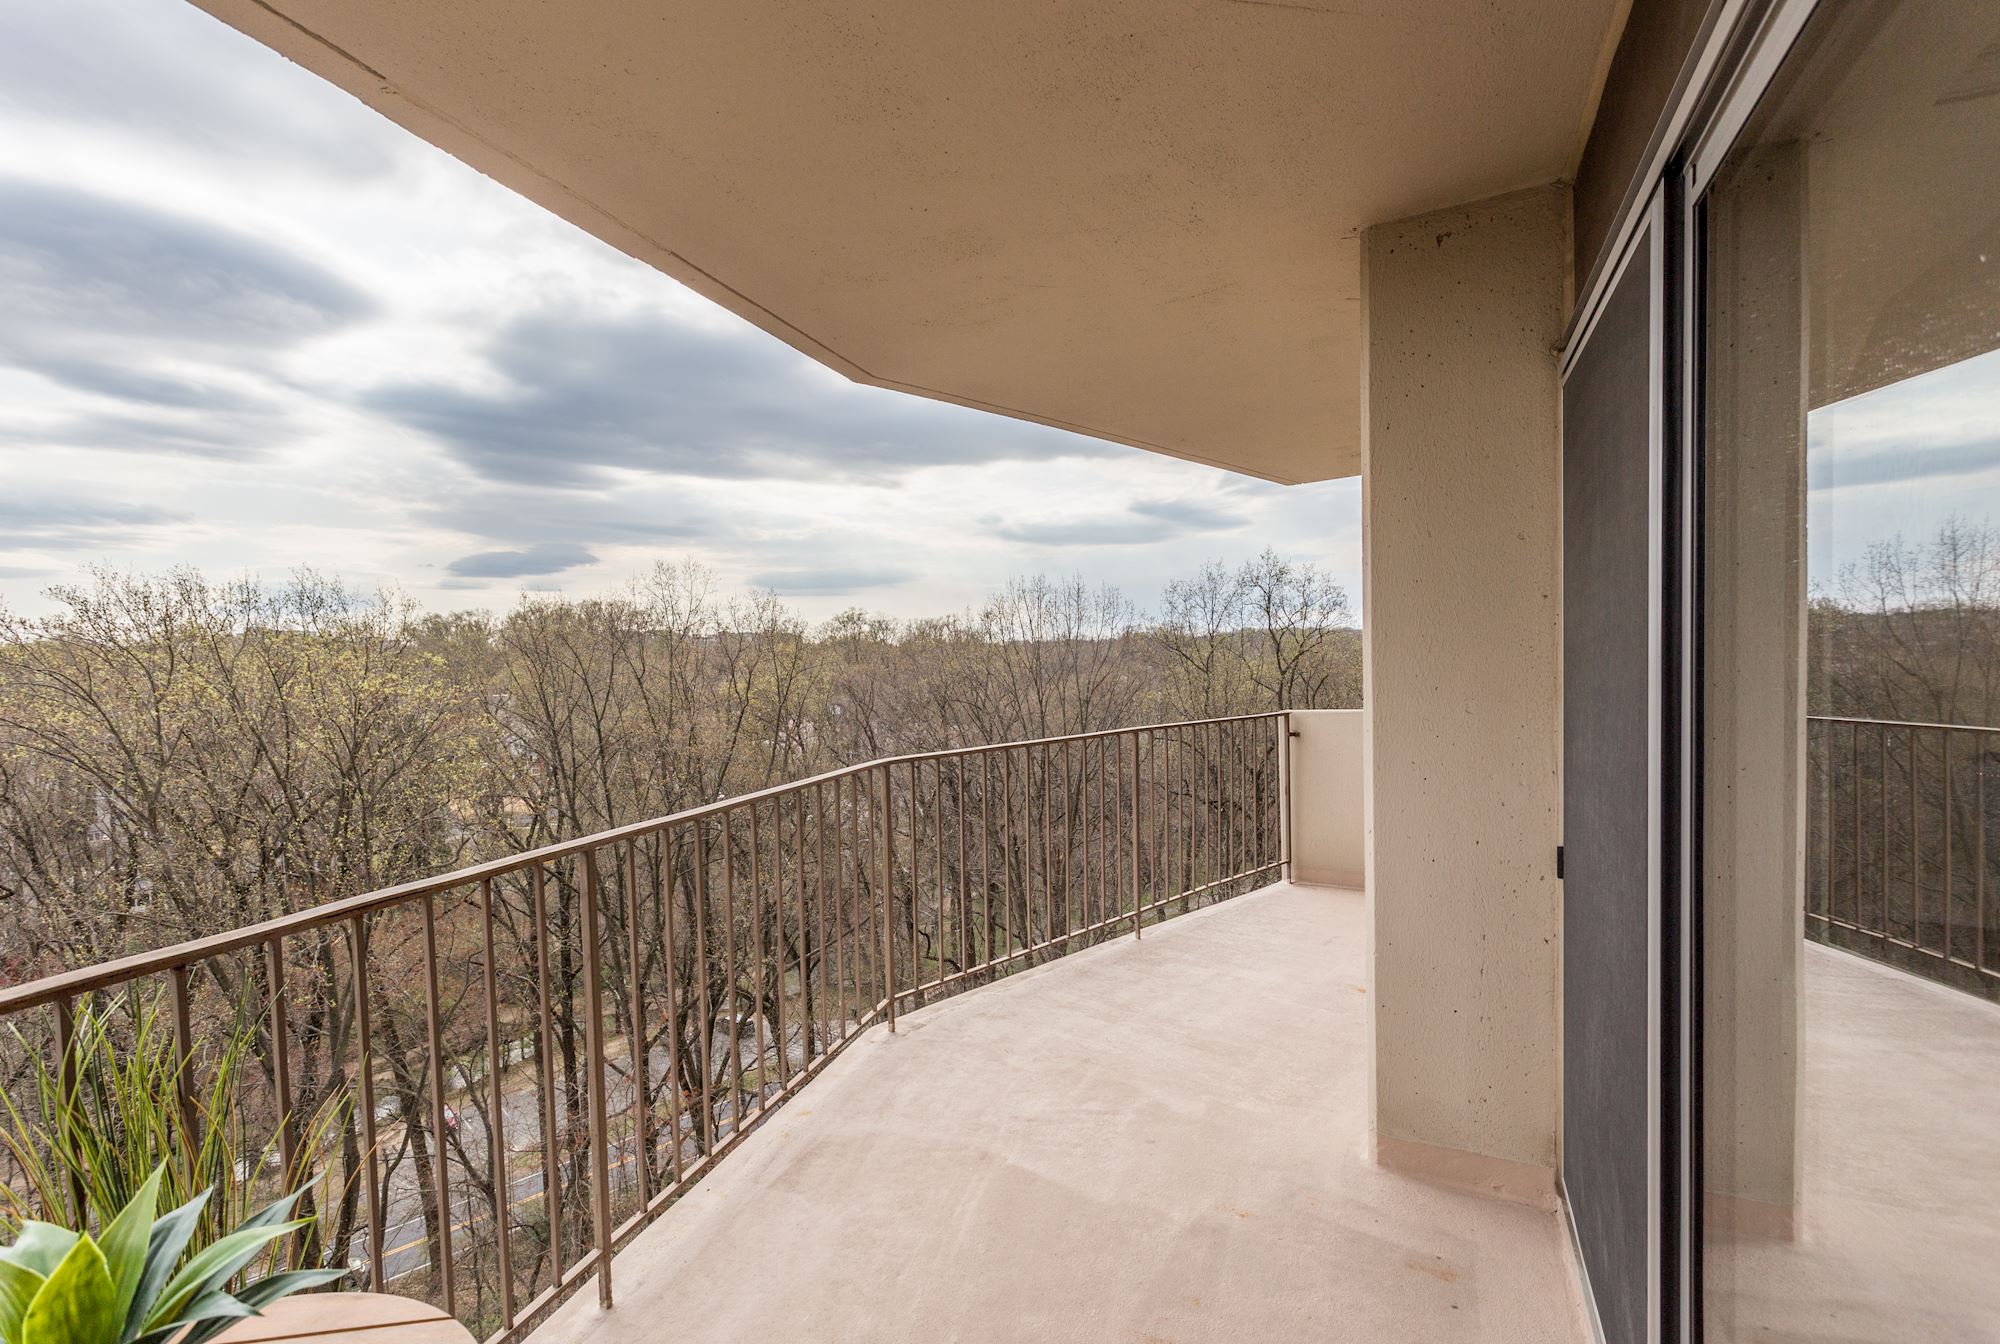 With sweeping treetop views toward downtown Silver Spring